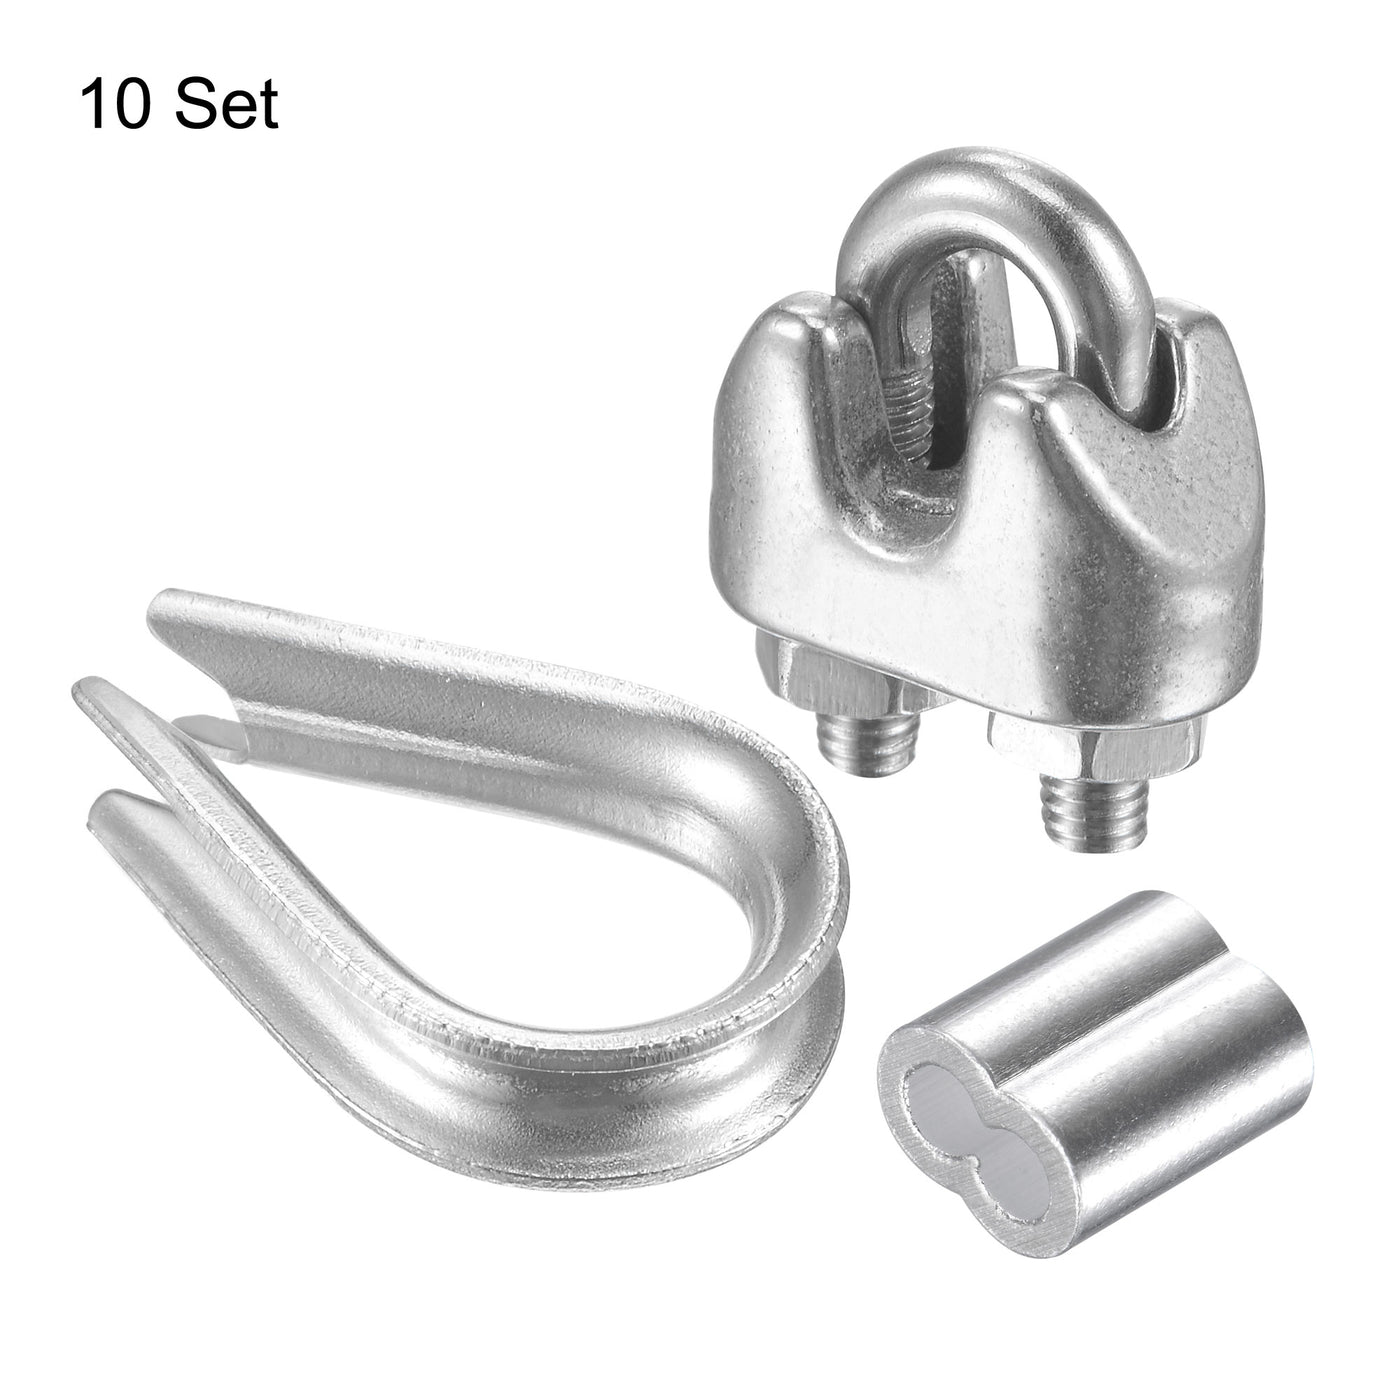 uxcell Uxcell Wire Rope Cable Clip Kit for M2, Included 304 Stainless Steel Rope Clamp, Thimble Rigging, Aluminum Crimping Loop Sleeve 10 Set